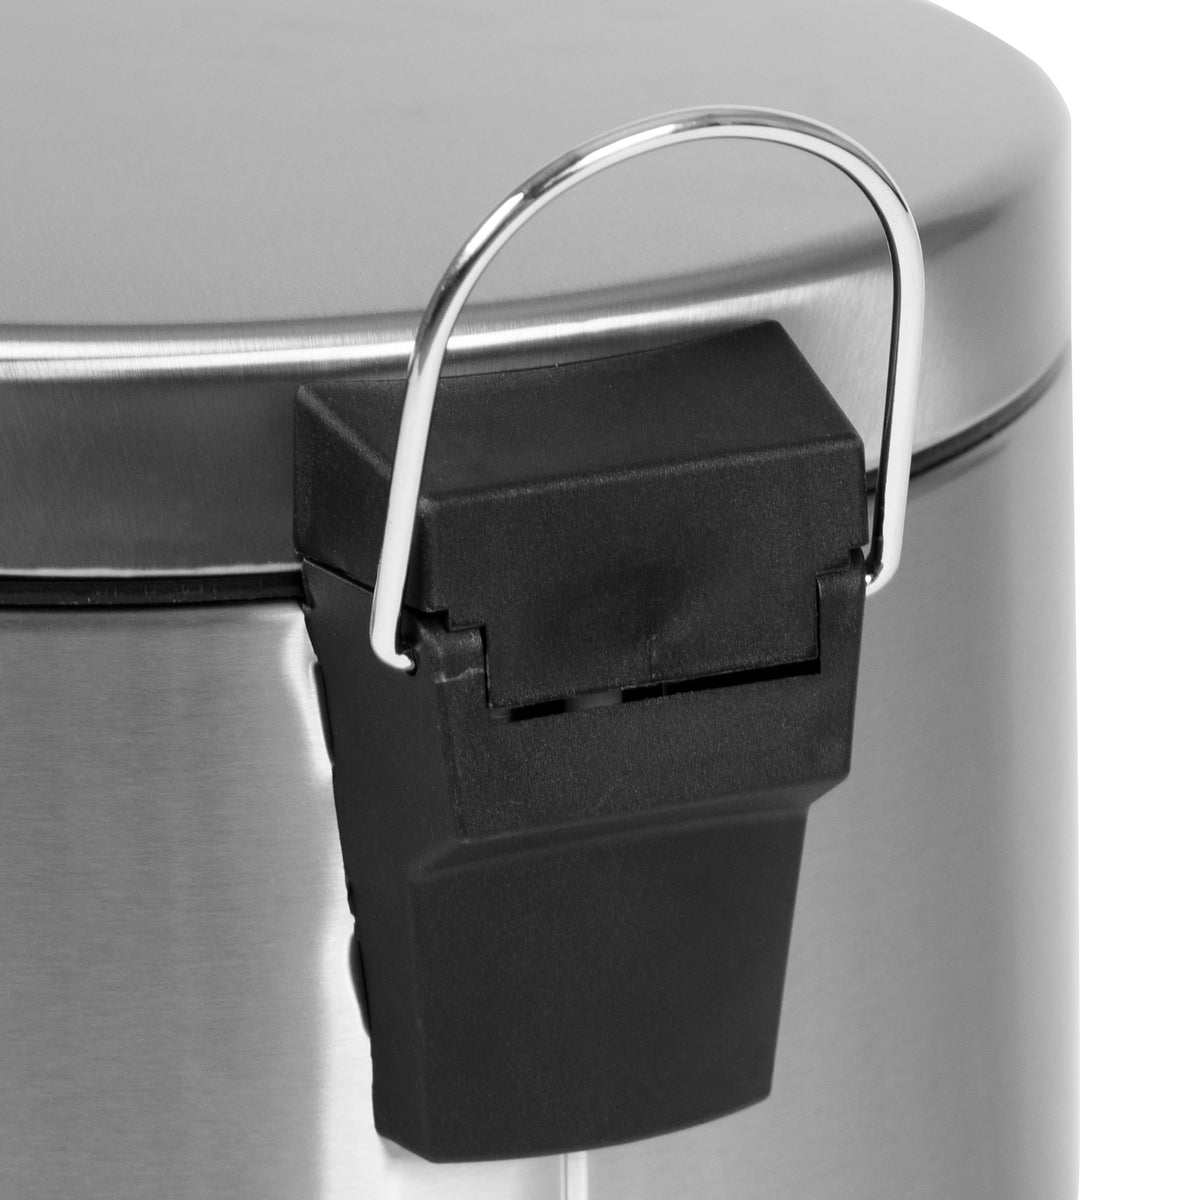 12L (3.2 Gallons) |#| Stainless Steel Imprint Resistant Soft Close, Step Trash Can - 3.2 Gallons (12L)